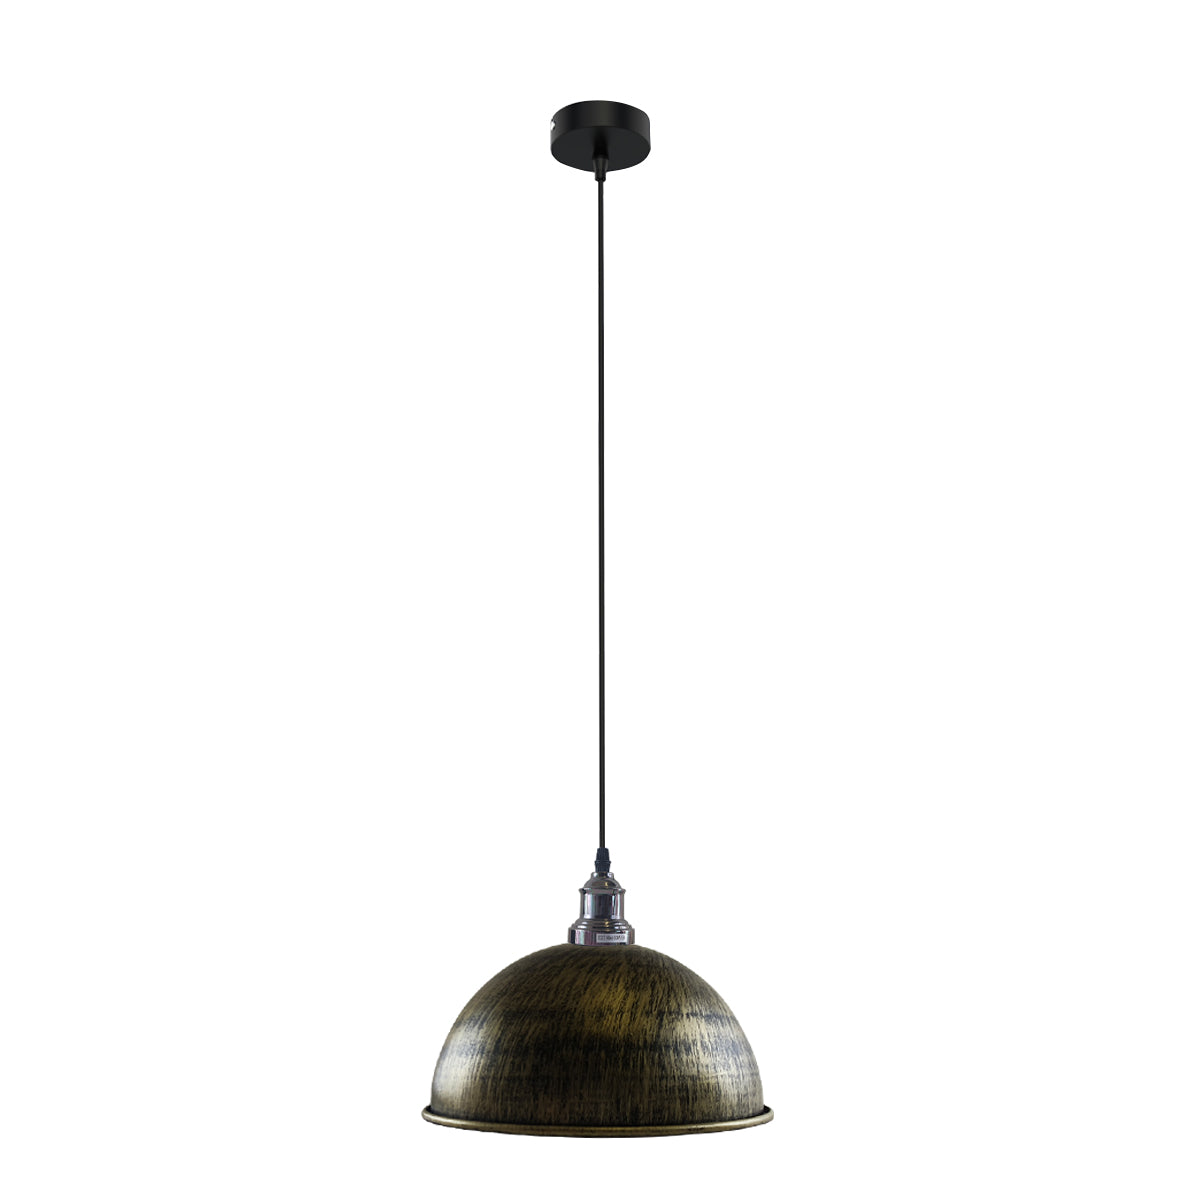  Brushed Brass Industrial Metal Dome Shade Ceiling Pendant Light